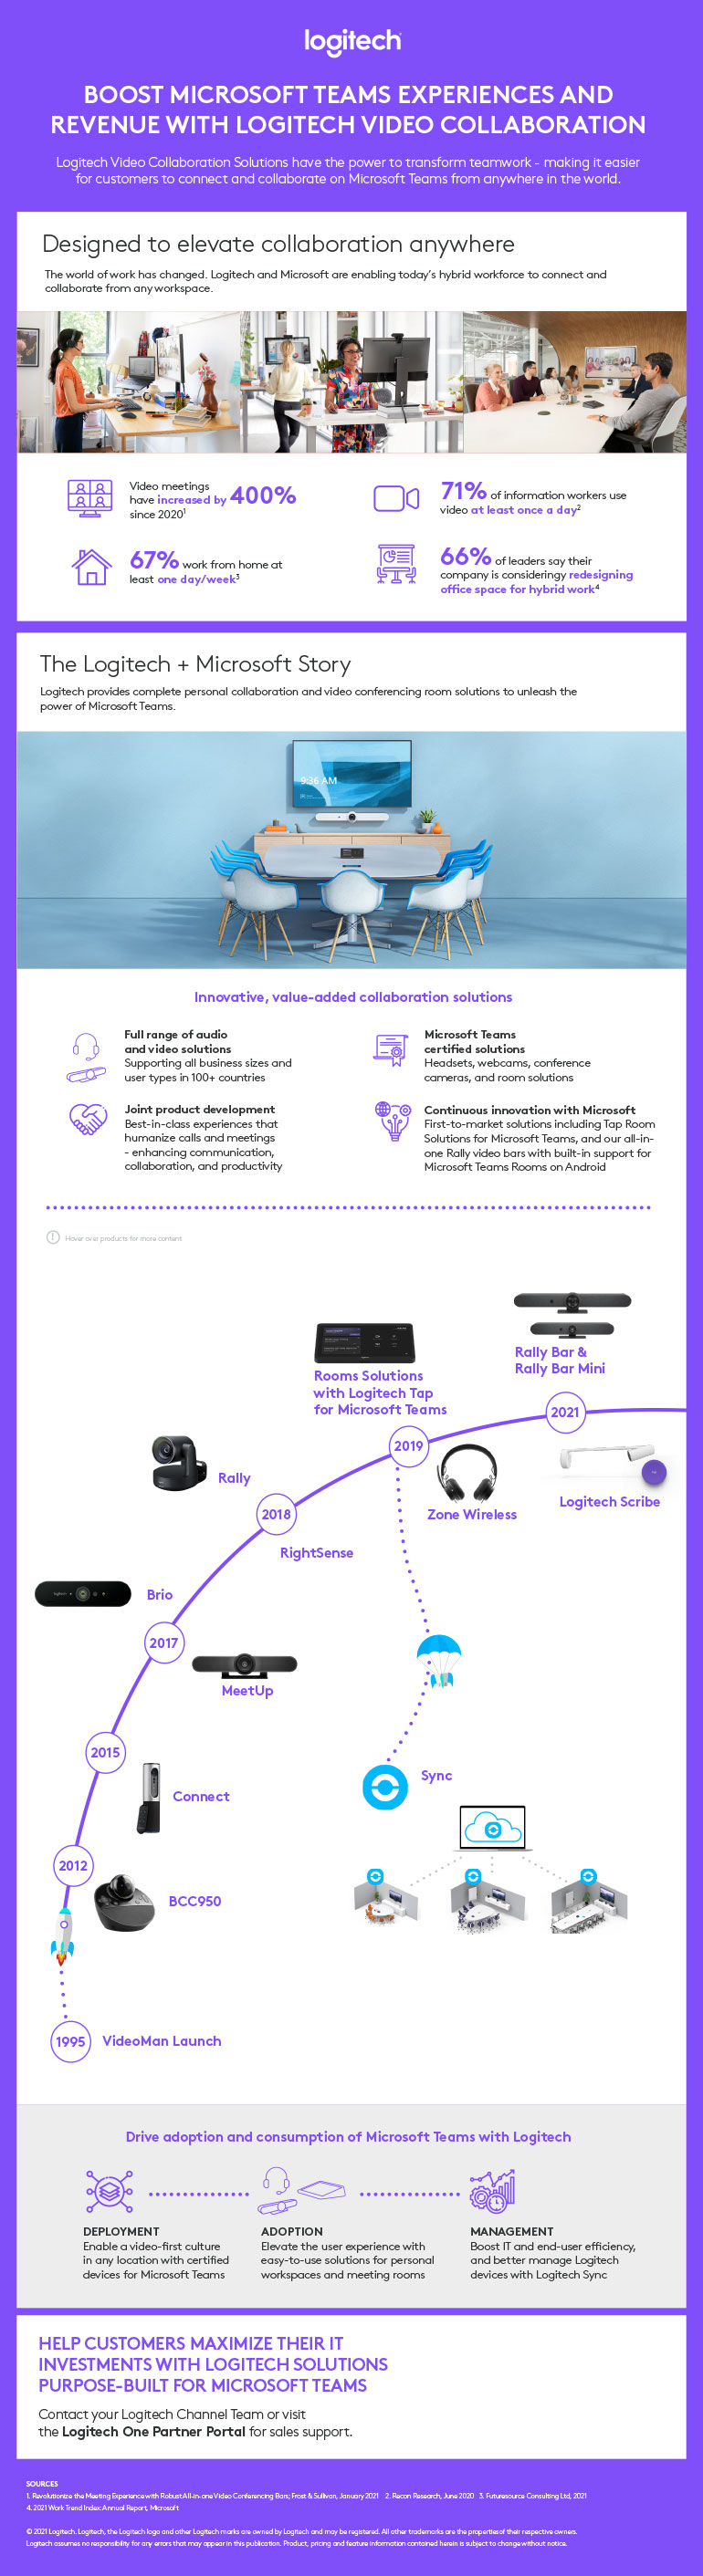 Boost Microsoft Teams Experiences and Revenue with Logitech Video Collaboration infographic as transcribed below